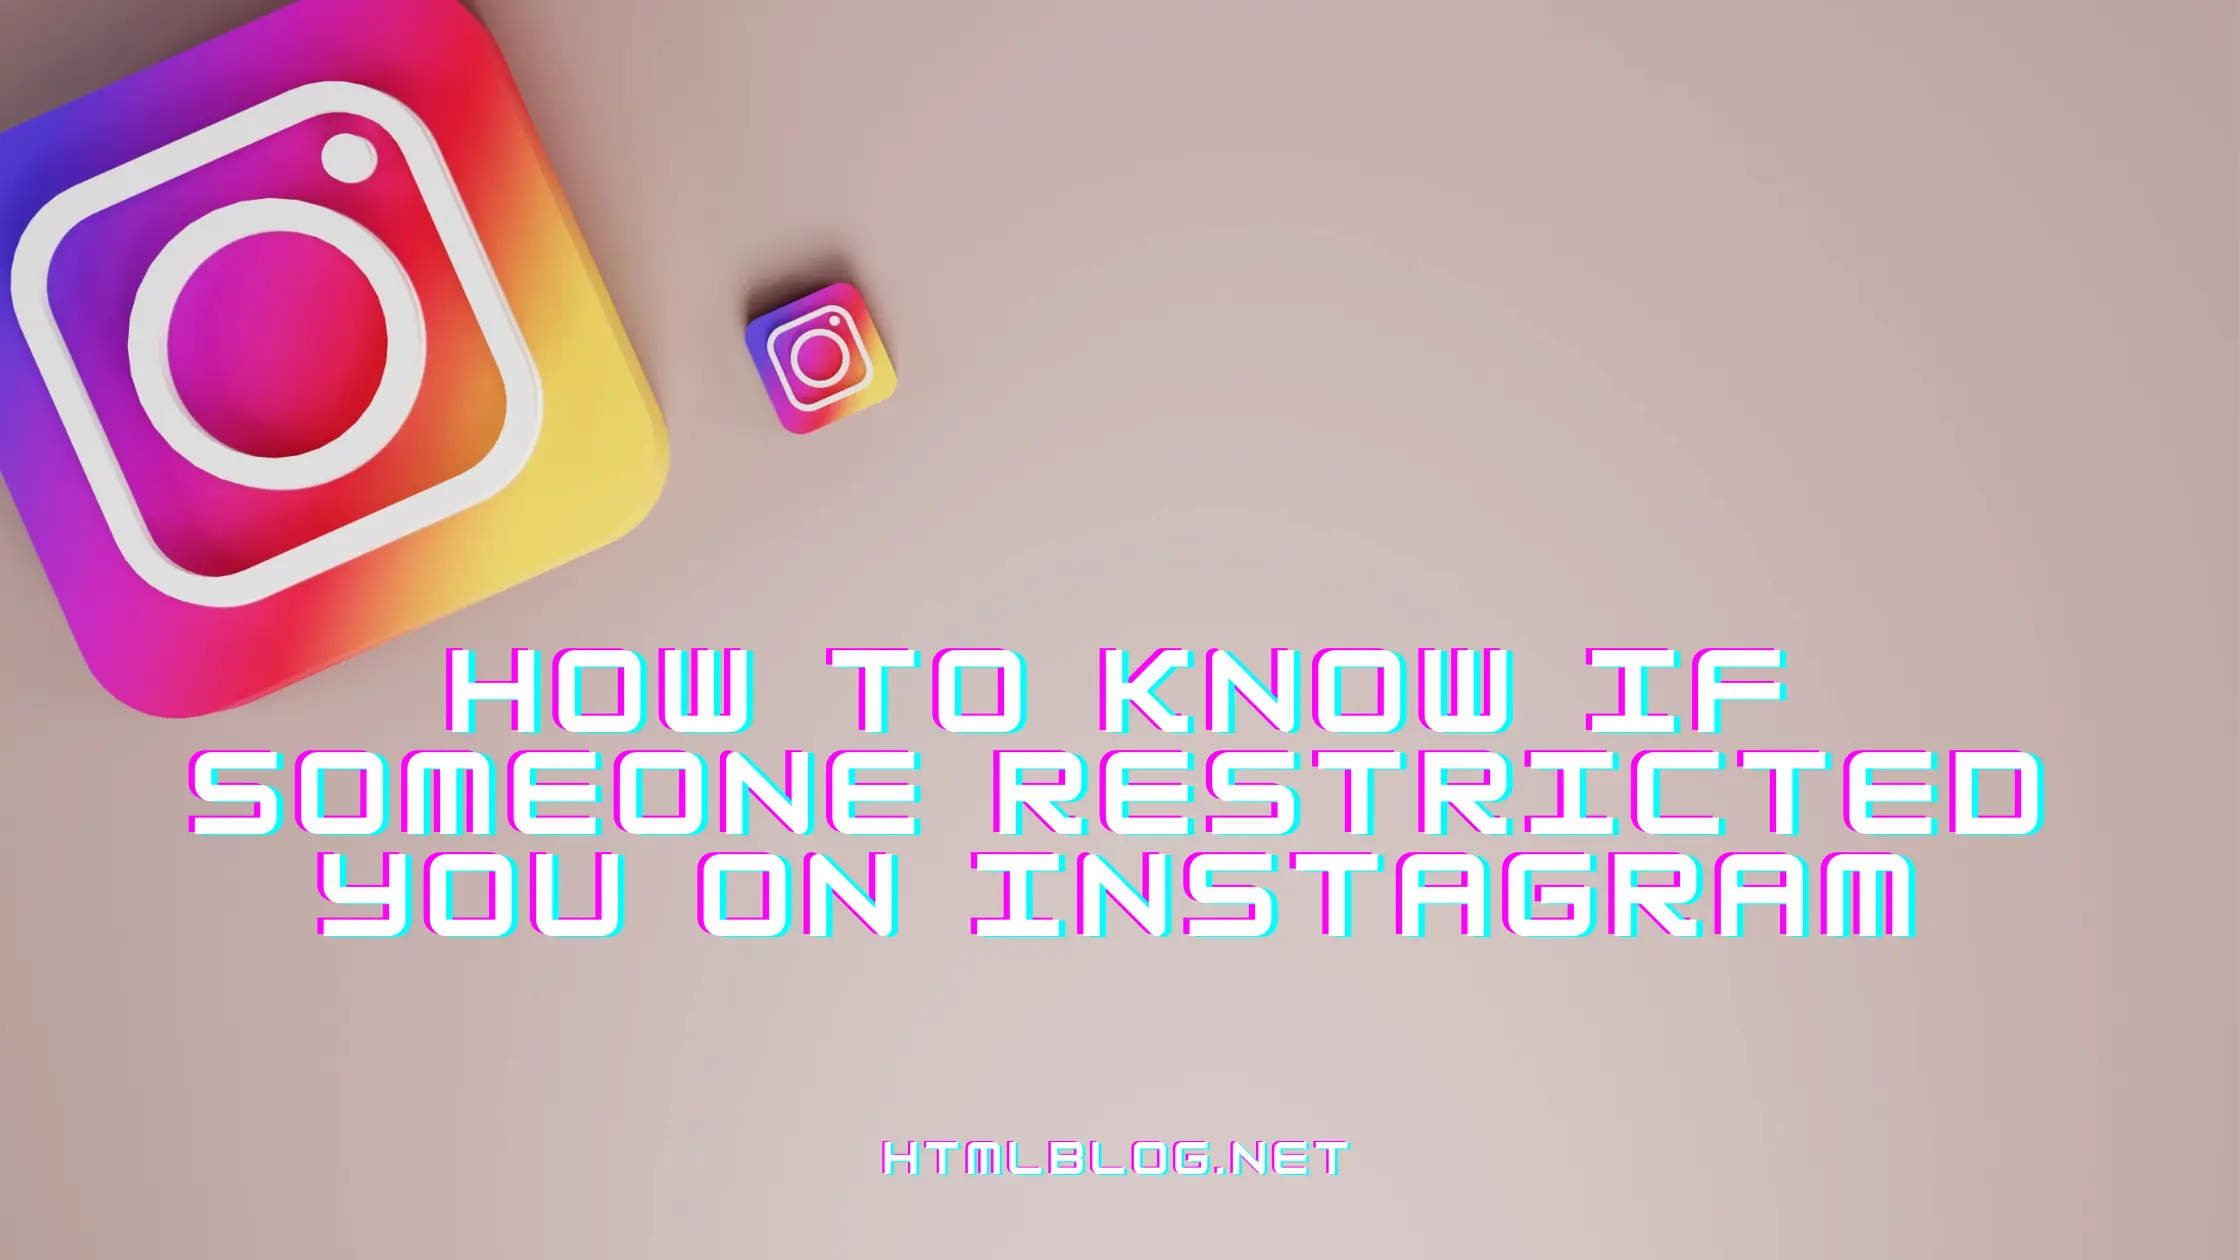 Instagram logo showing in smaller and bigger size. Text showing blog post title: How to Know if Someone Restricted You on Instagram